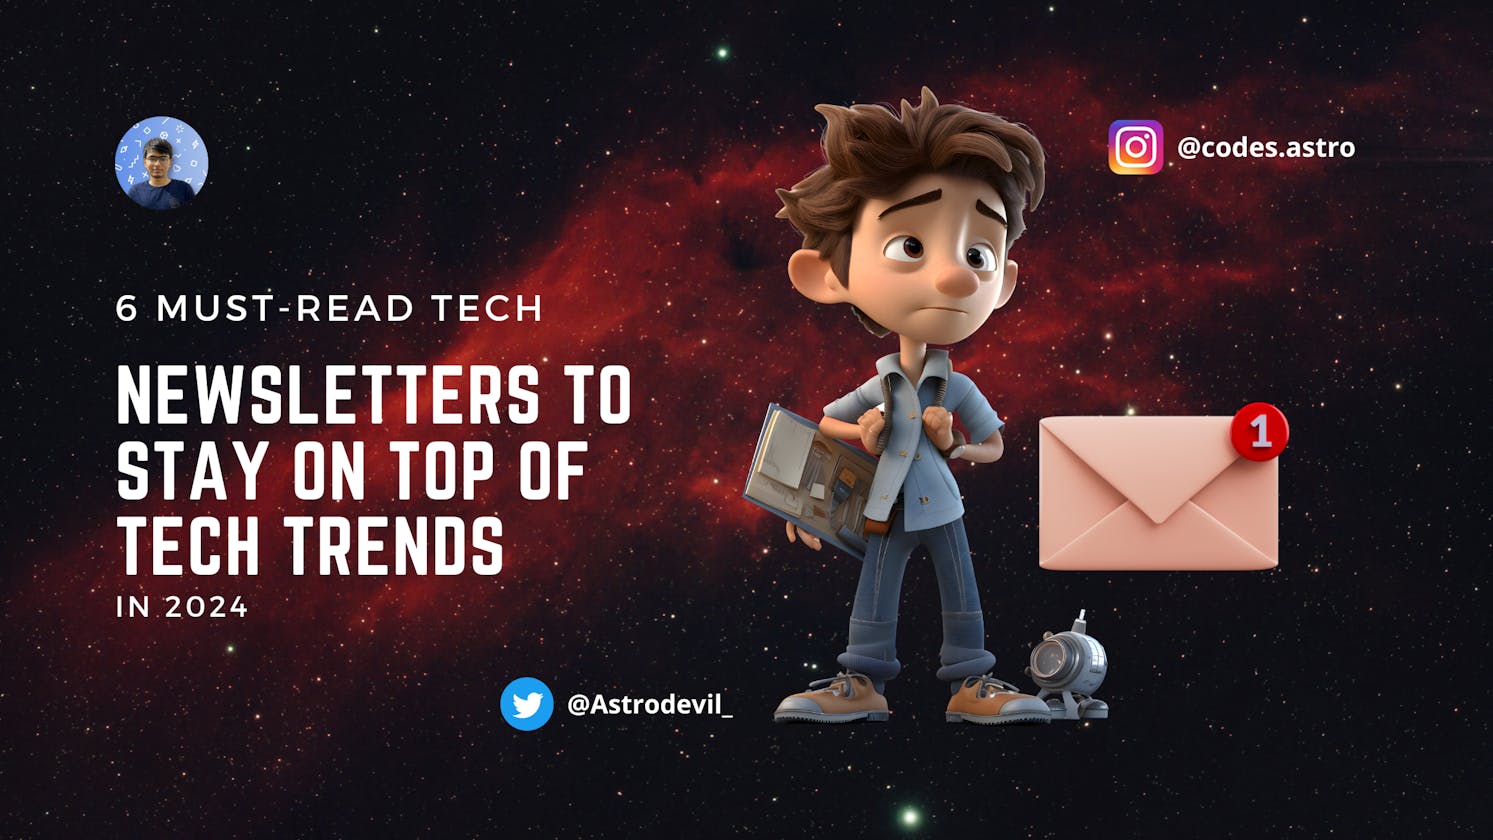 6 Must-Read Tech Newsletters to Keep You Ahead in 2024